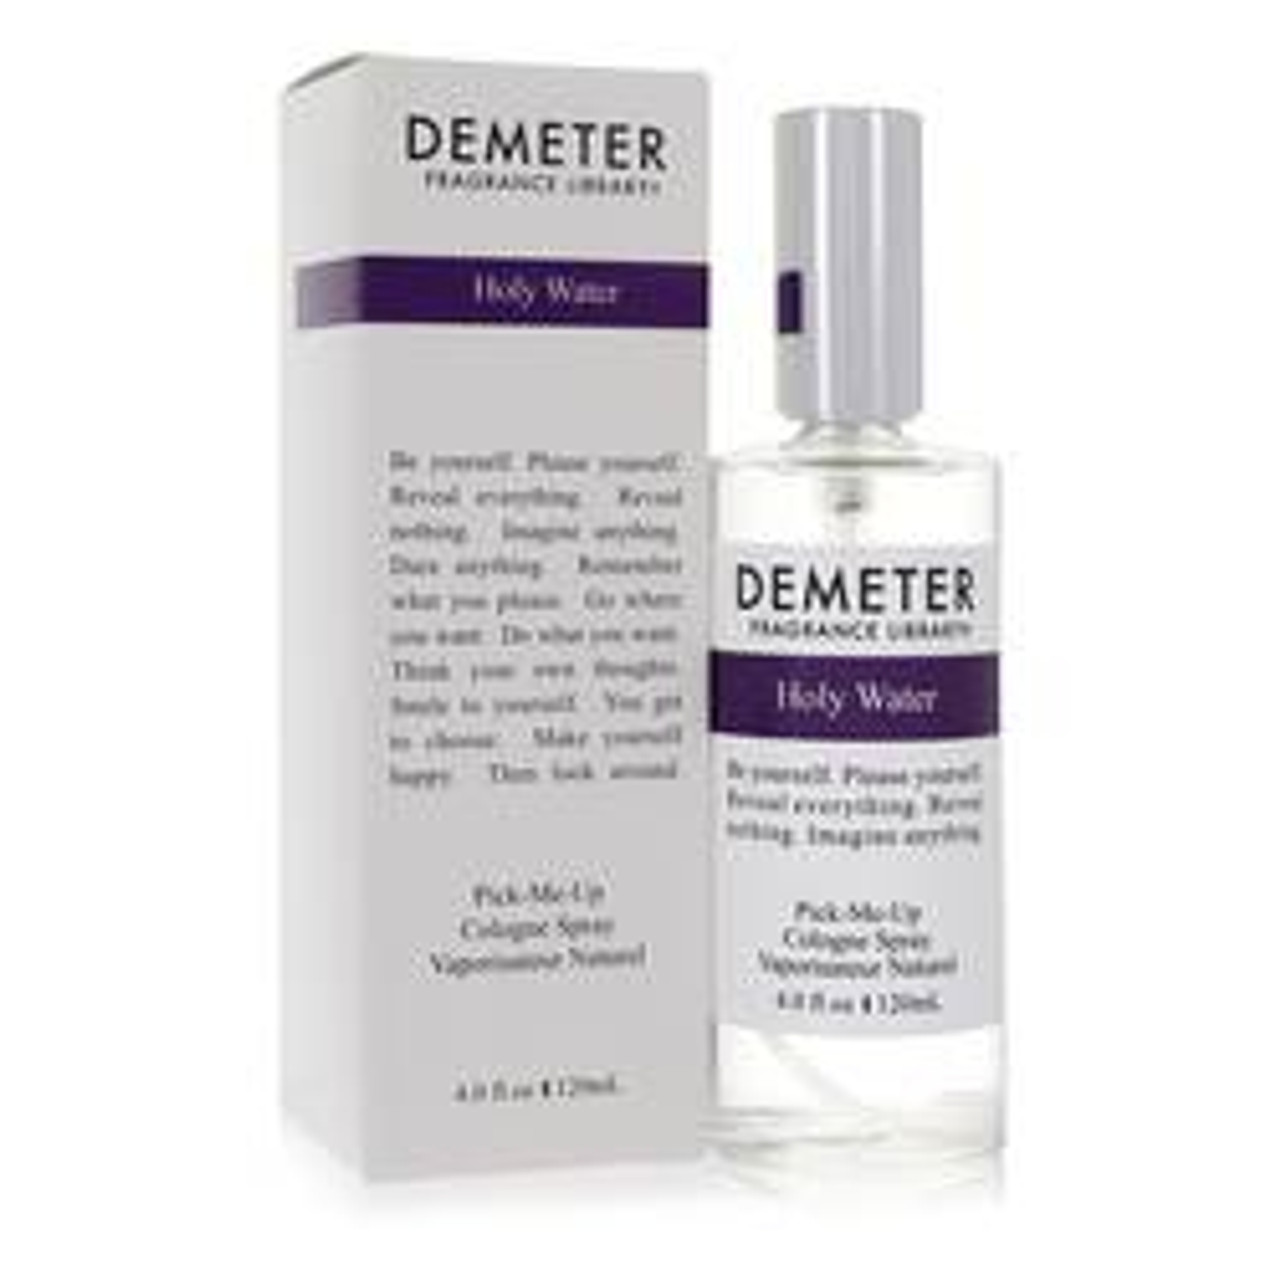 Demeter Holy Water Perfume By Demeter Cologne Spray 4 oz for Women - [From 79.50 - Choose pk Qty ] - *Ships from Miami